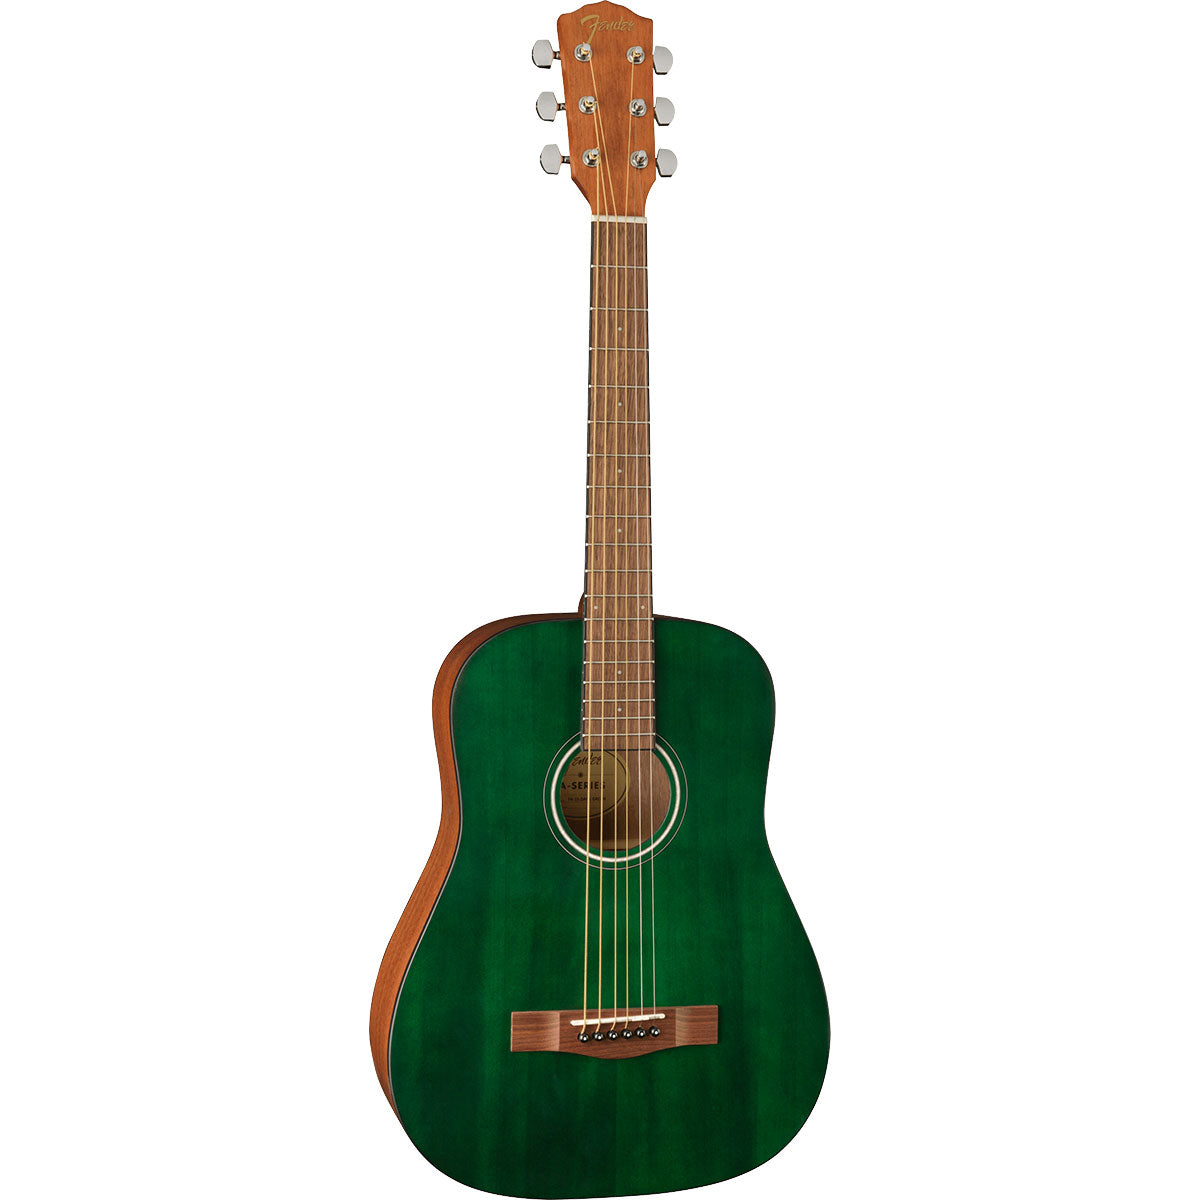 Perspective view of Fender FA-15 3/4 Steel Acoustic Guitar - Green showing top and left side